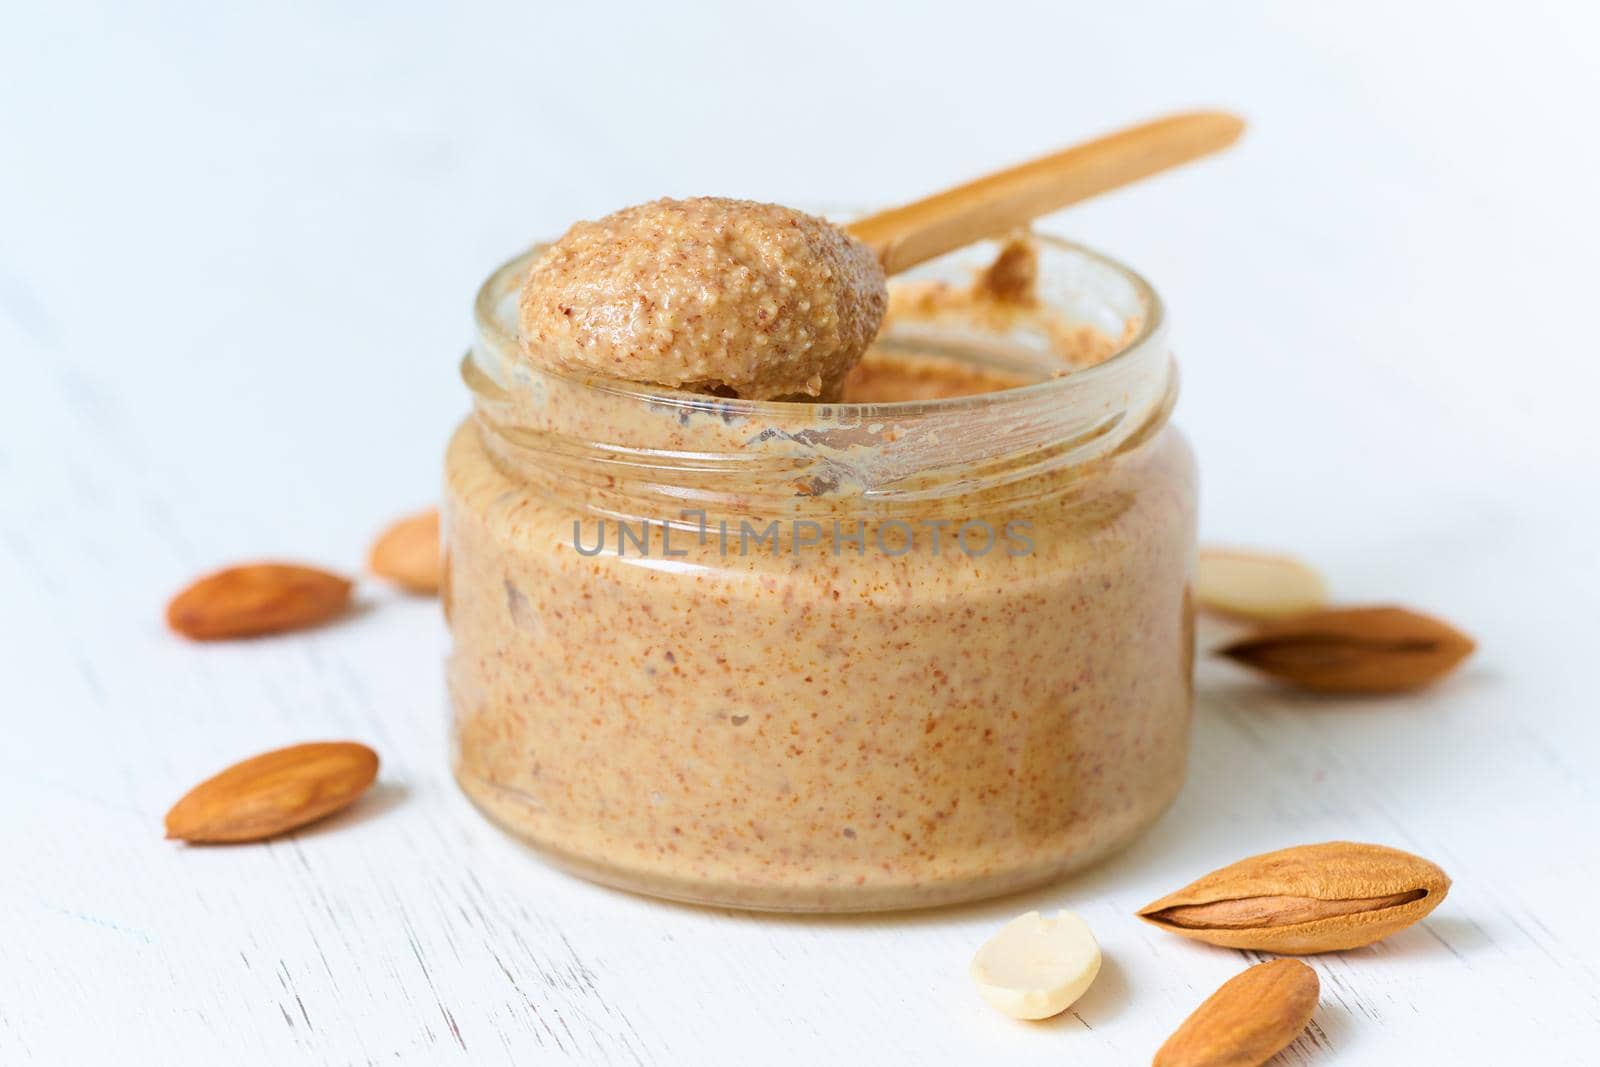 Almond butter, raw food paste made from grinding almonds into nut butter, crunchy and stir, white wooden table, glass jar, side view, close up